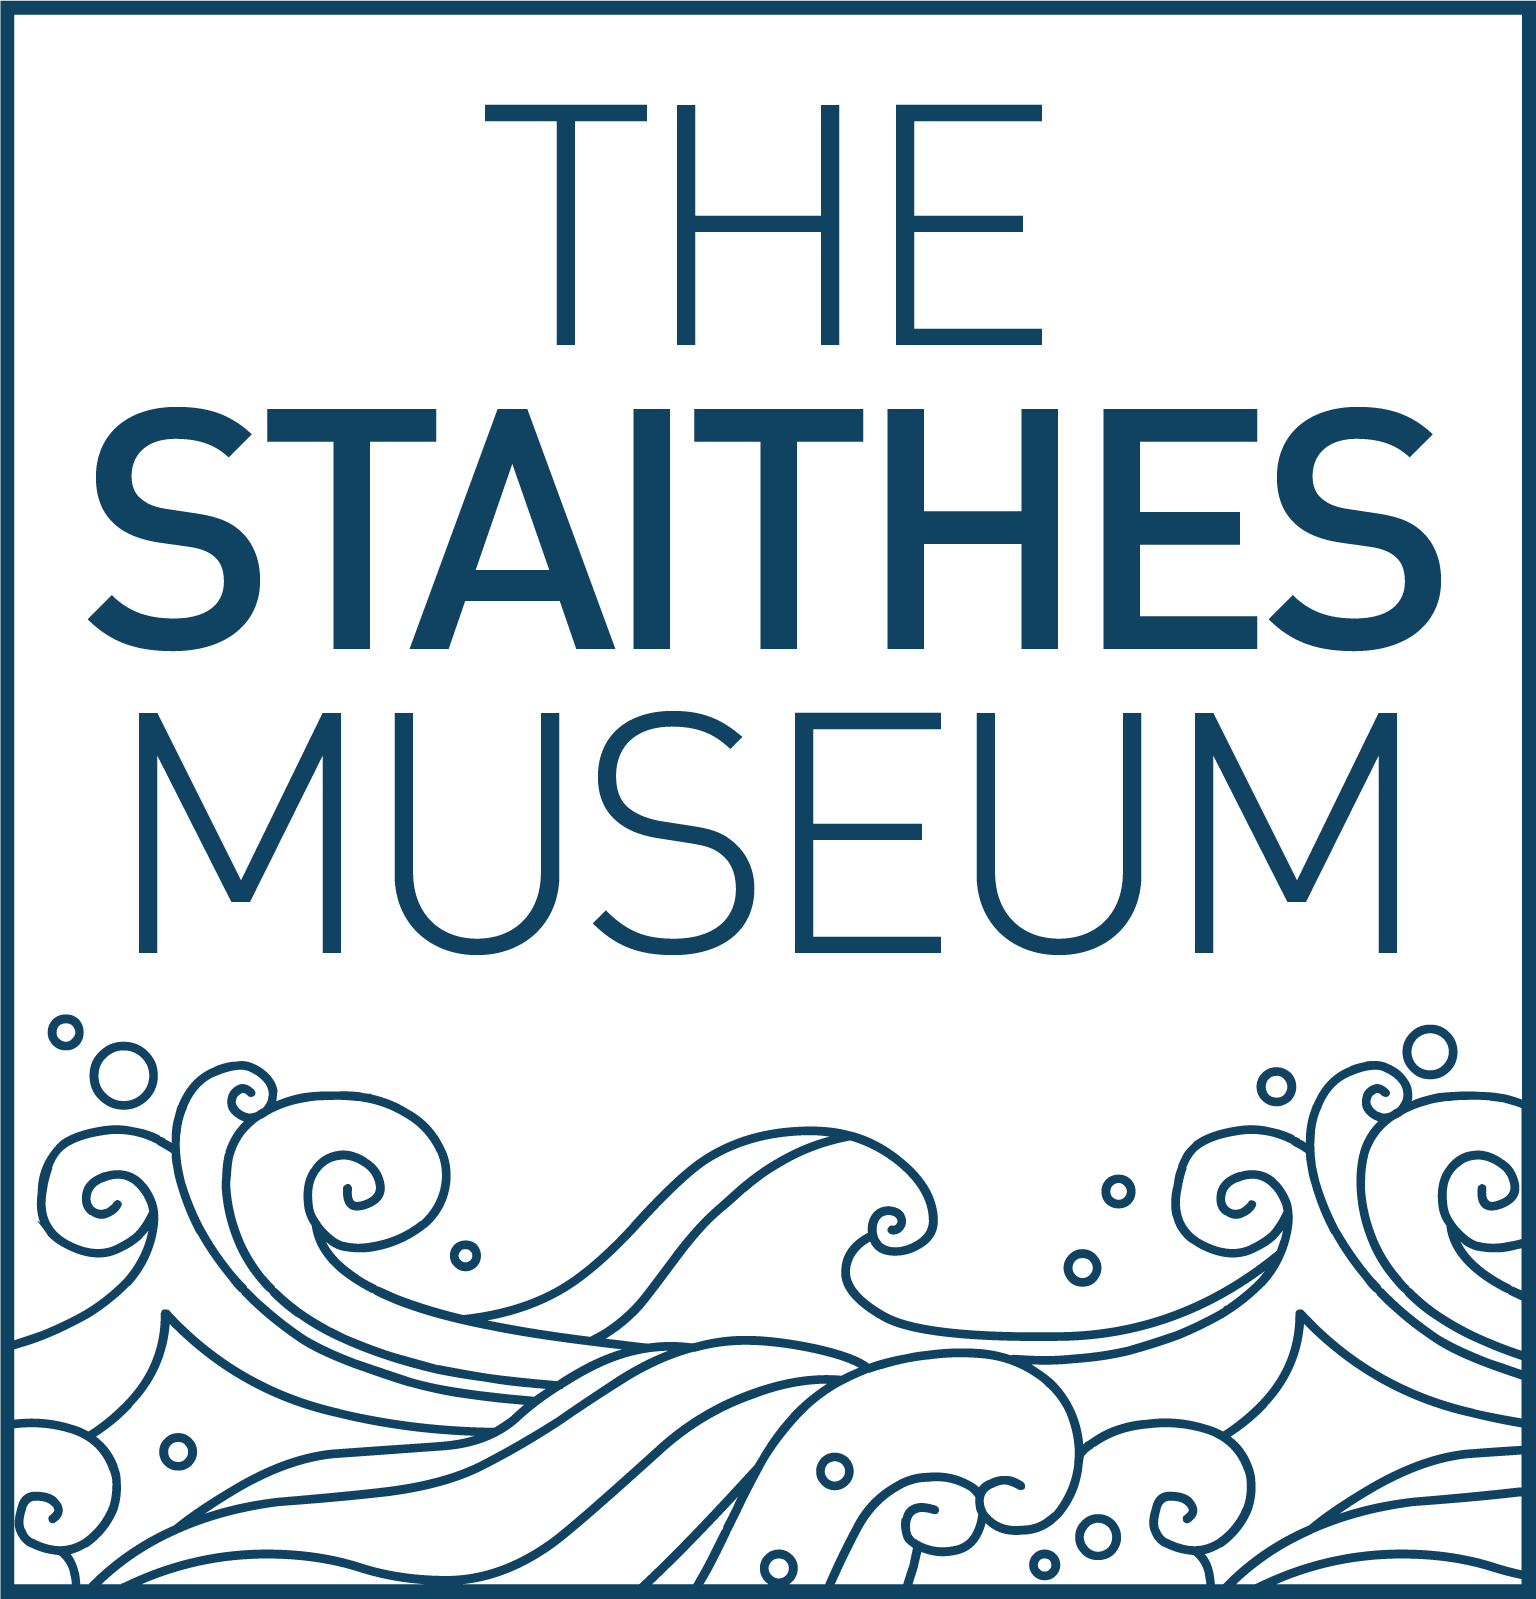 Staithes Museum logo